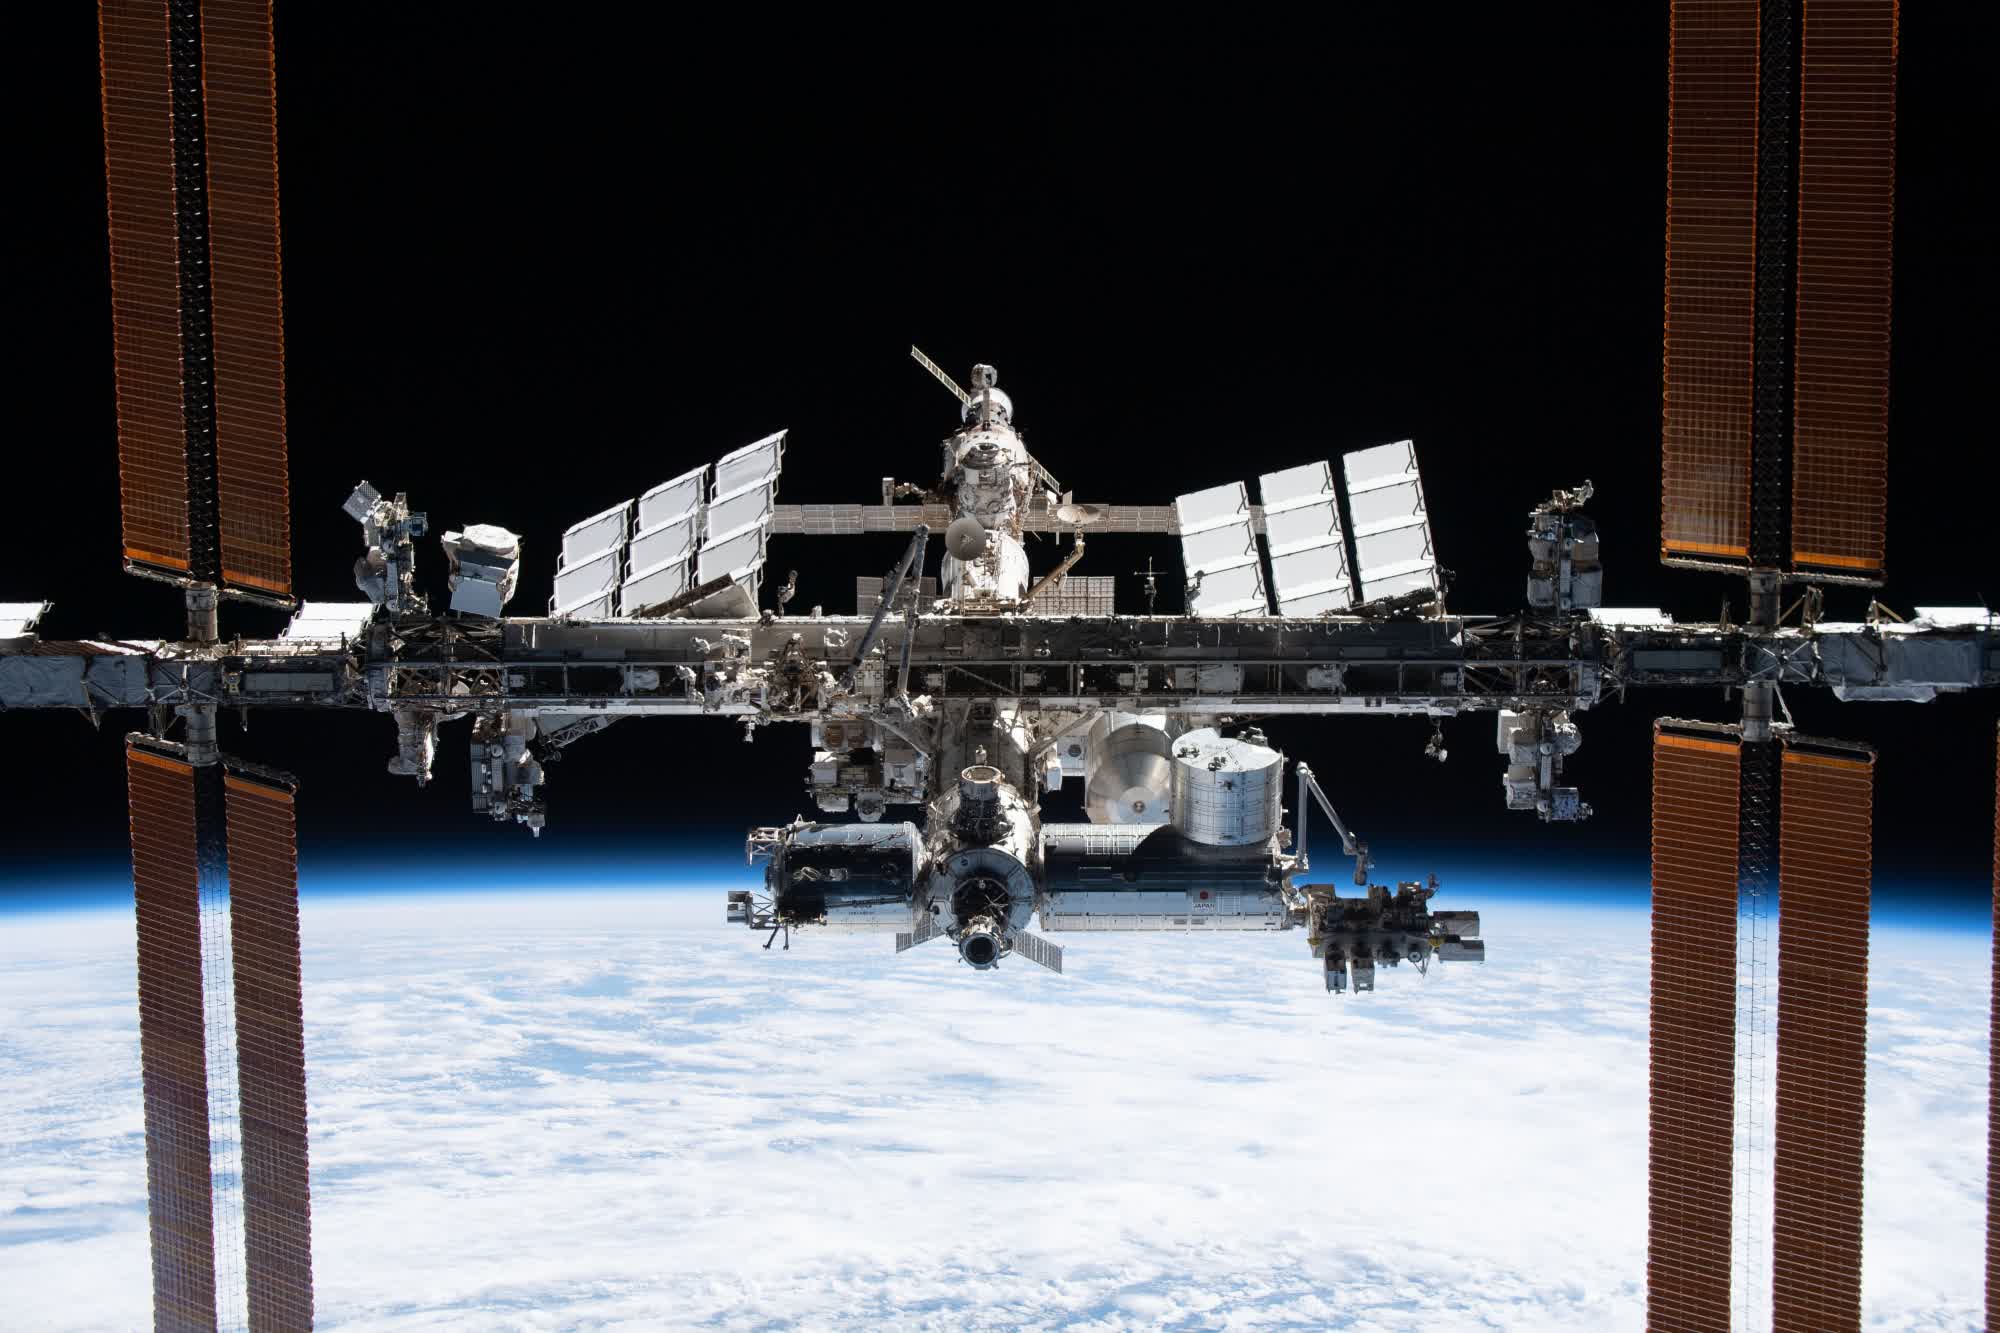 NASA selects SpaceX to help deorbit the International Space Station